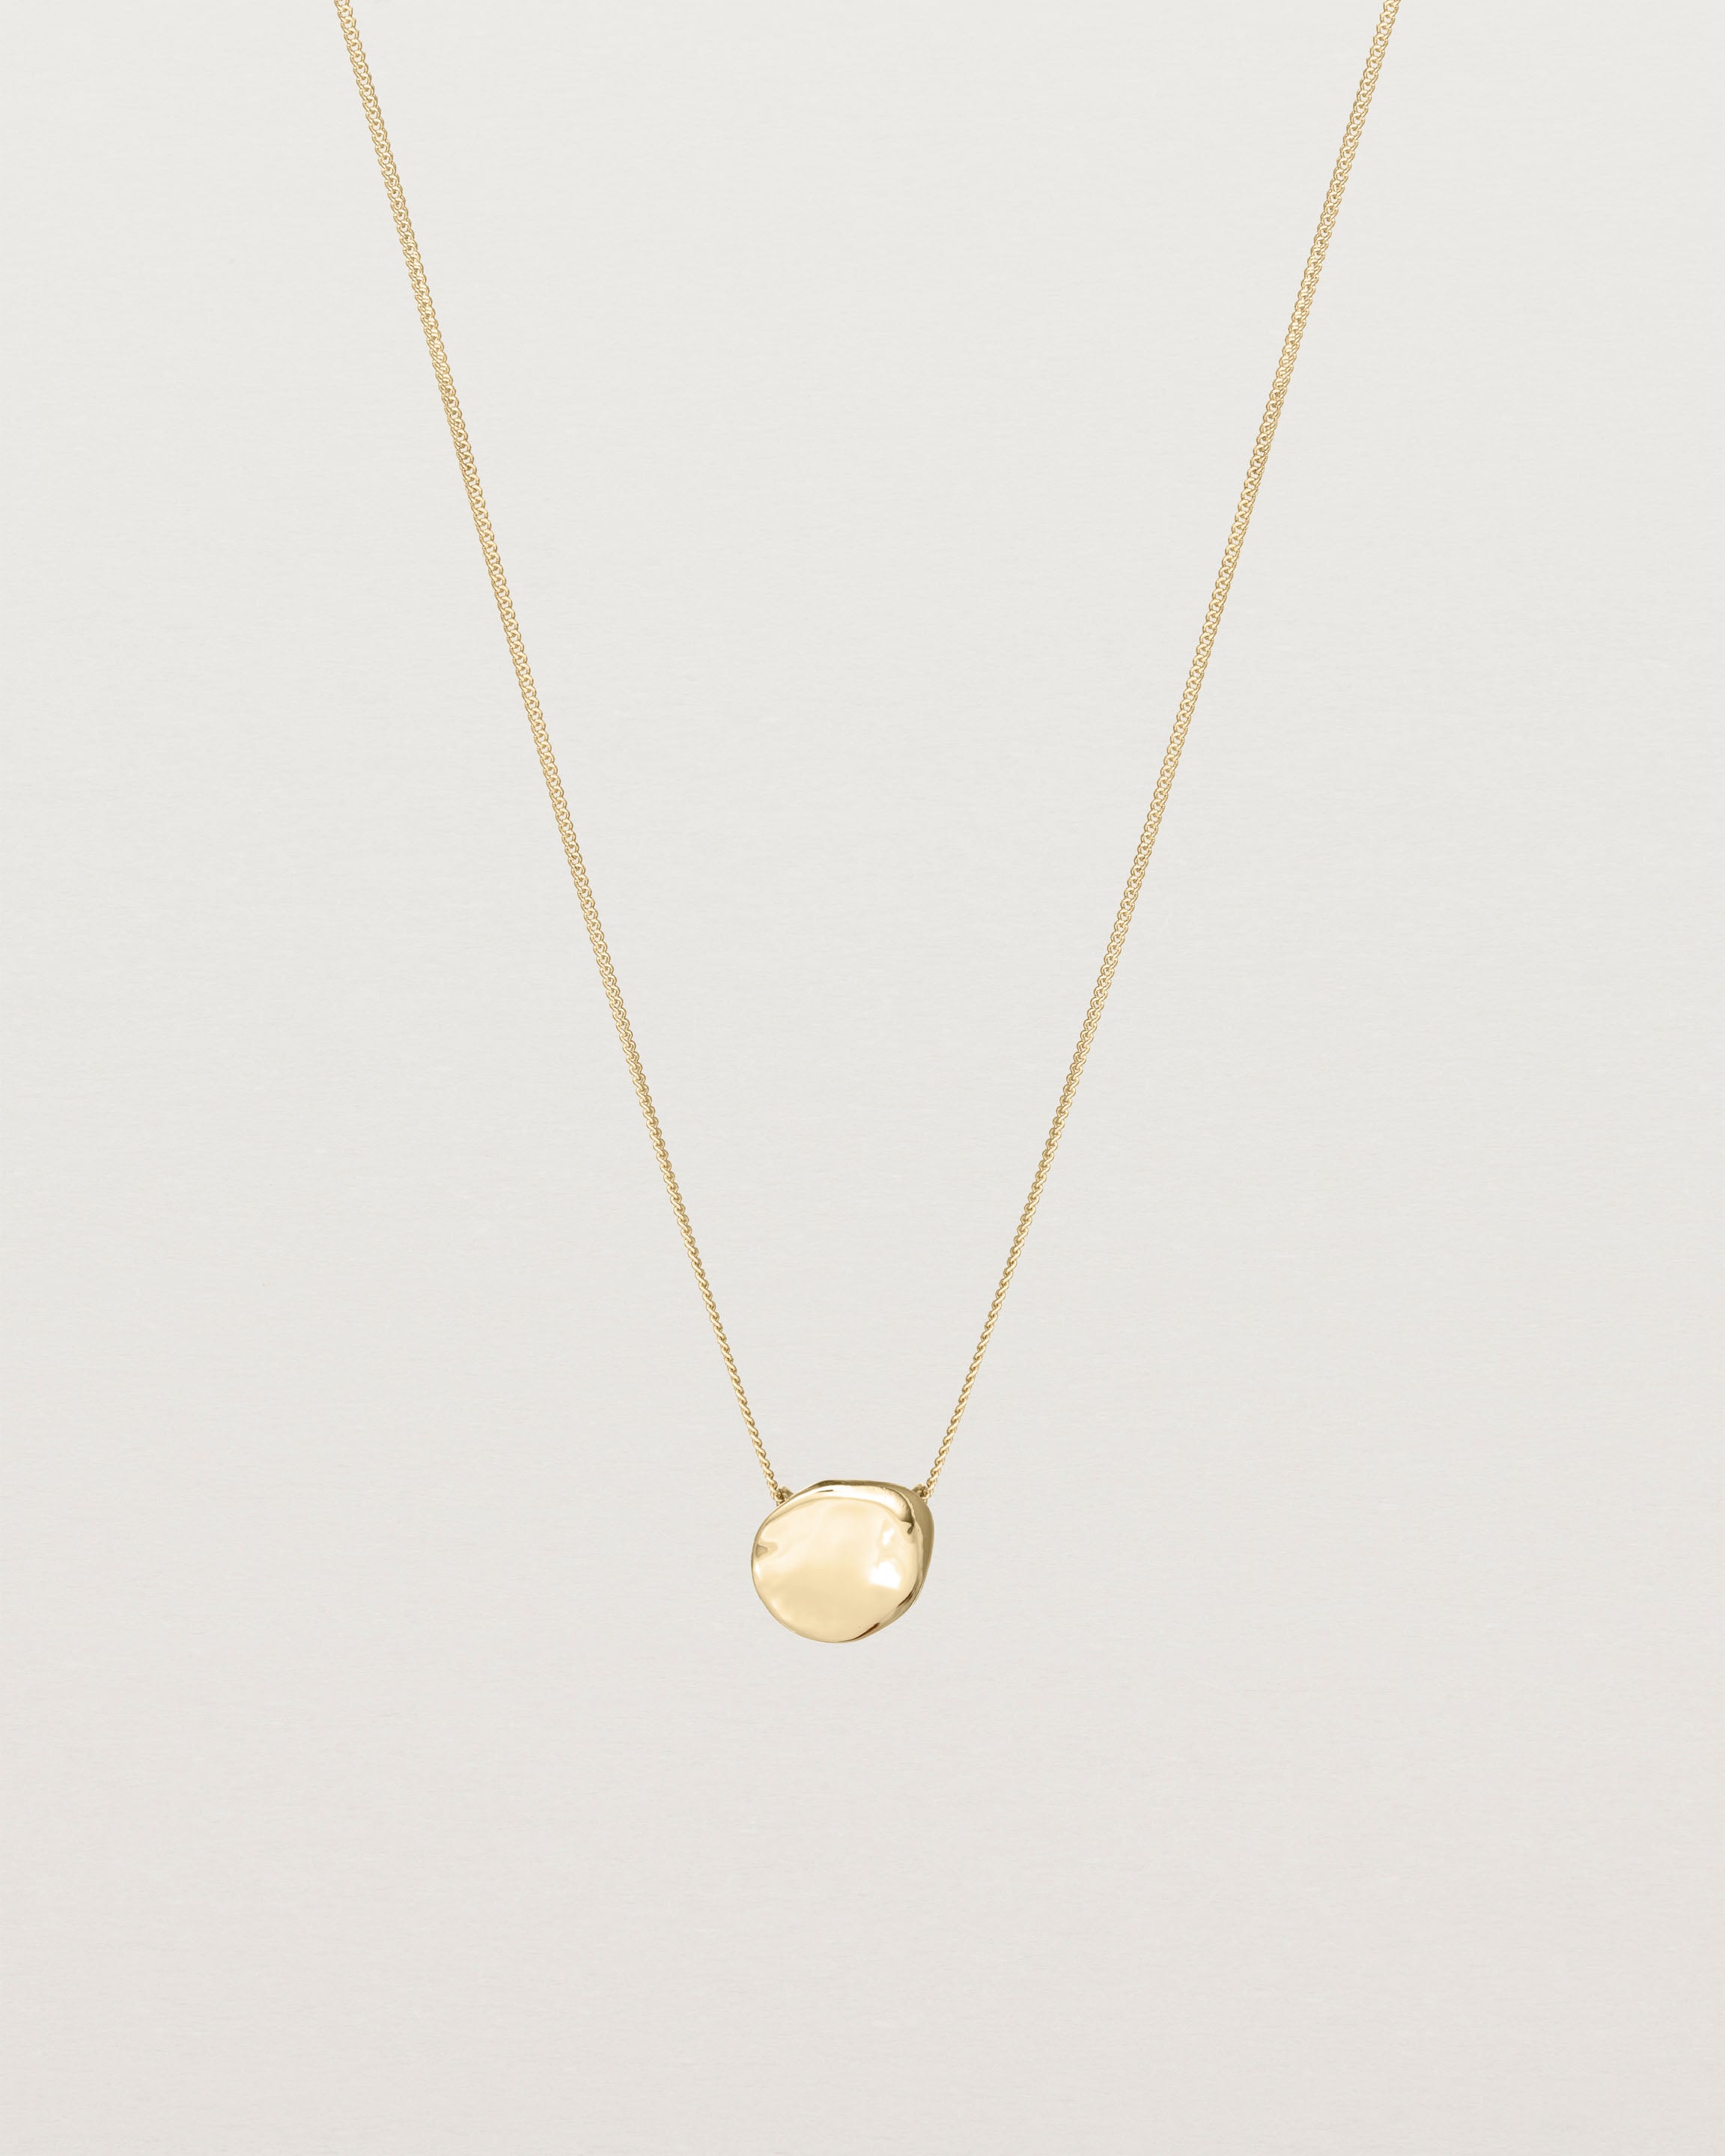 Front view of the Petite Mana Necklace in yellow gold.